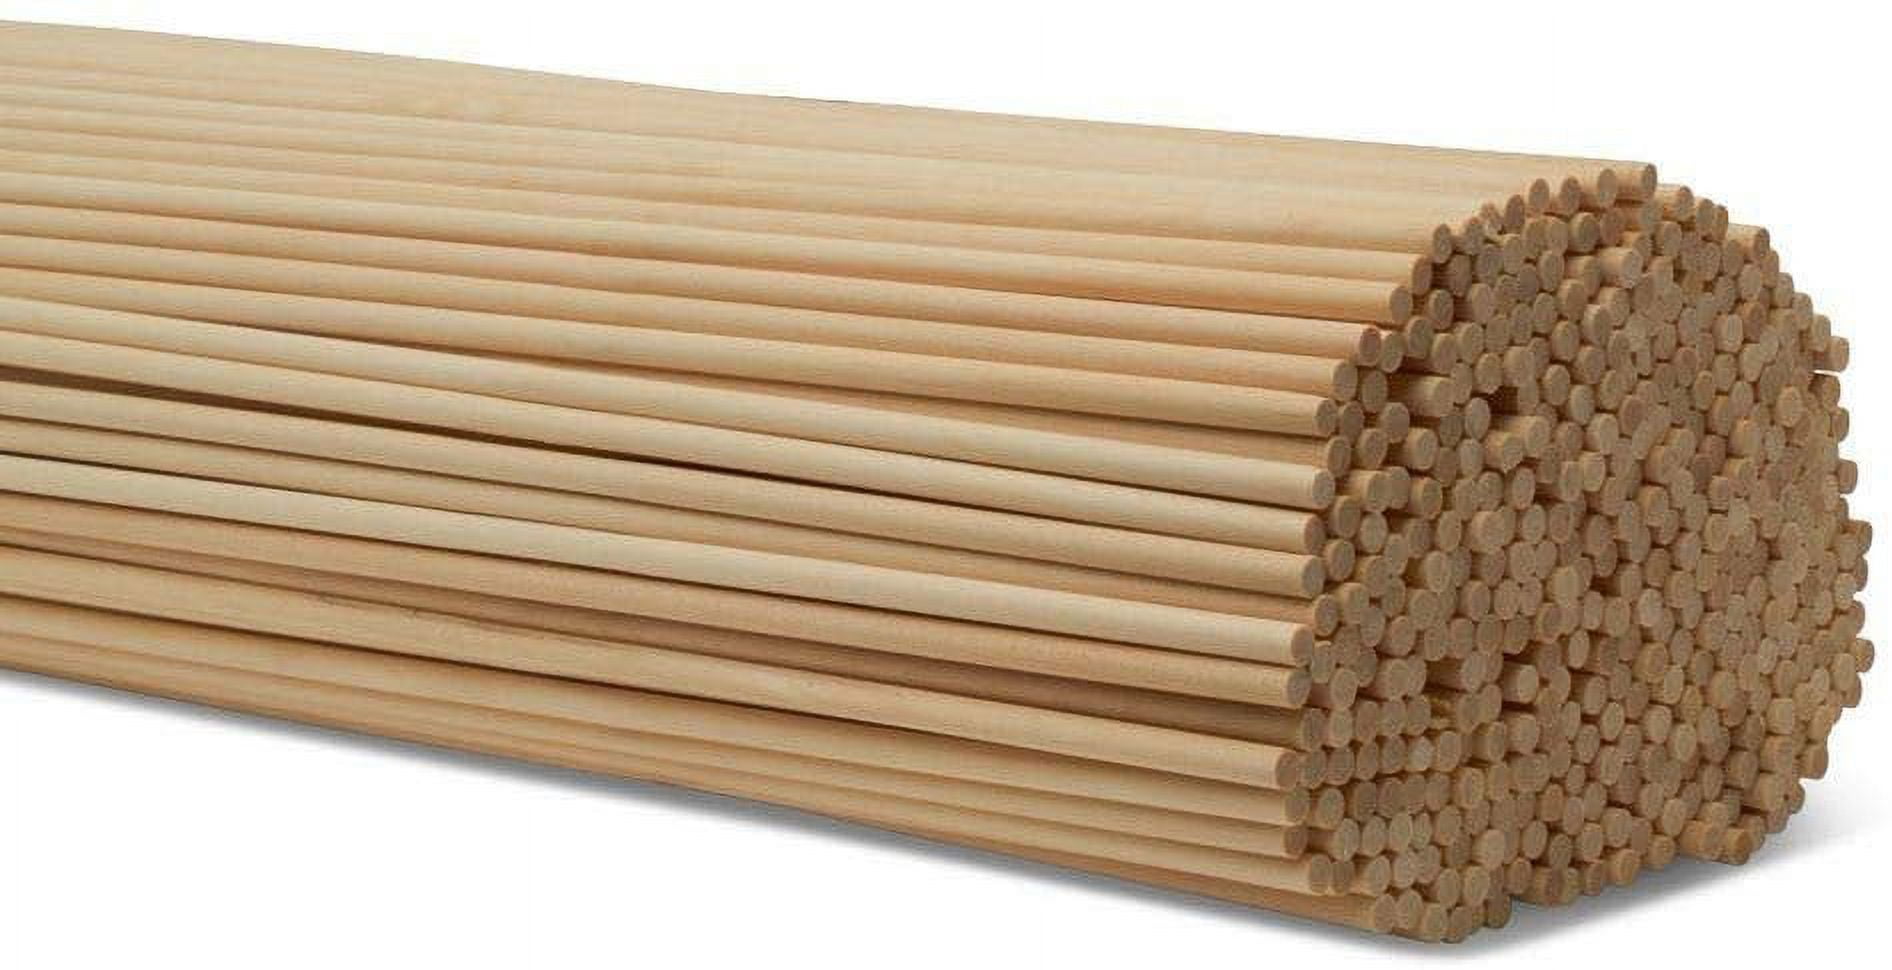 Dowel Rods Wood Sticks Wooden Dowel Rods - 1/4 x 12 Inch Unfinished  Hardwood Sticks - for Crafts and DIYers - 1000 Pieces by Woodpeckers 